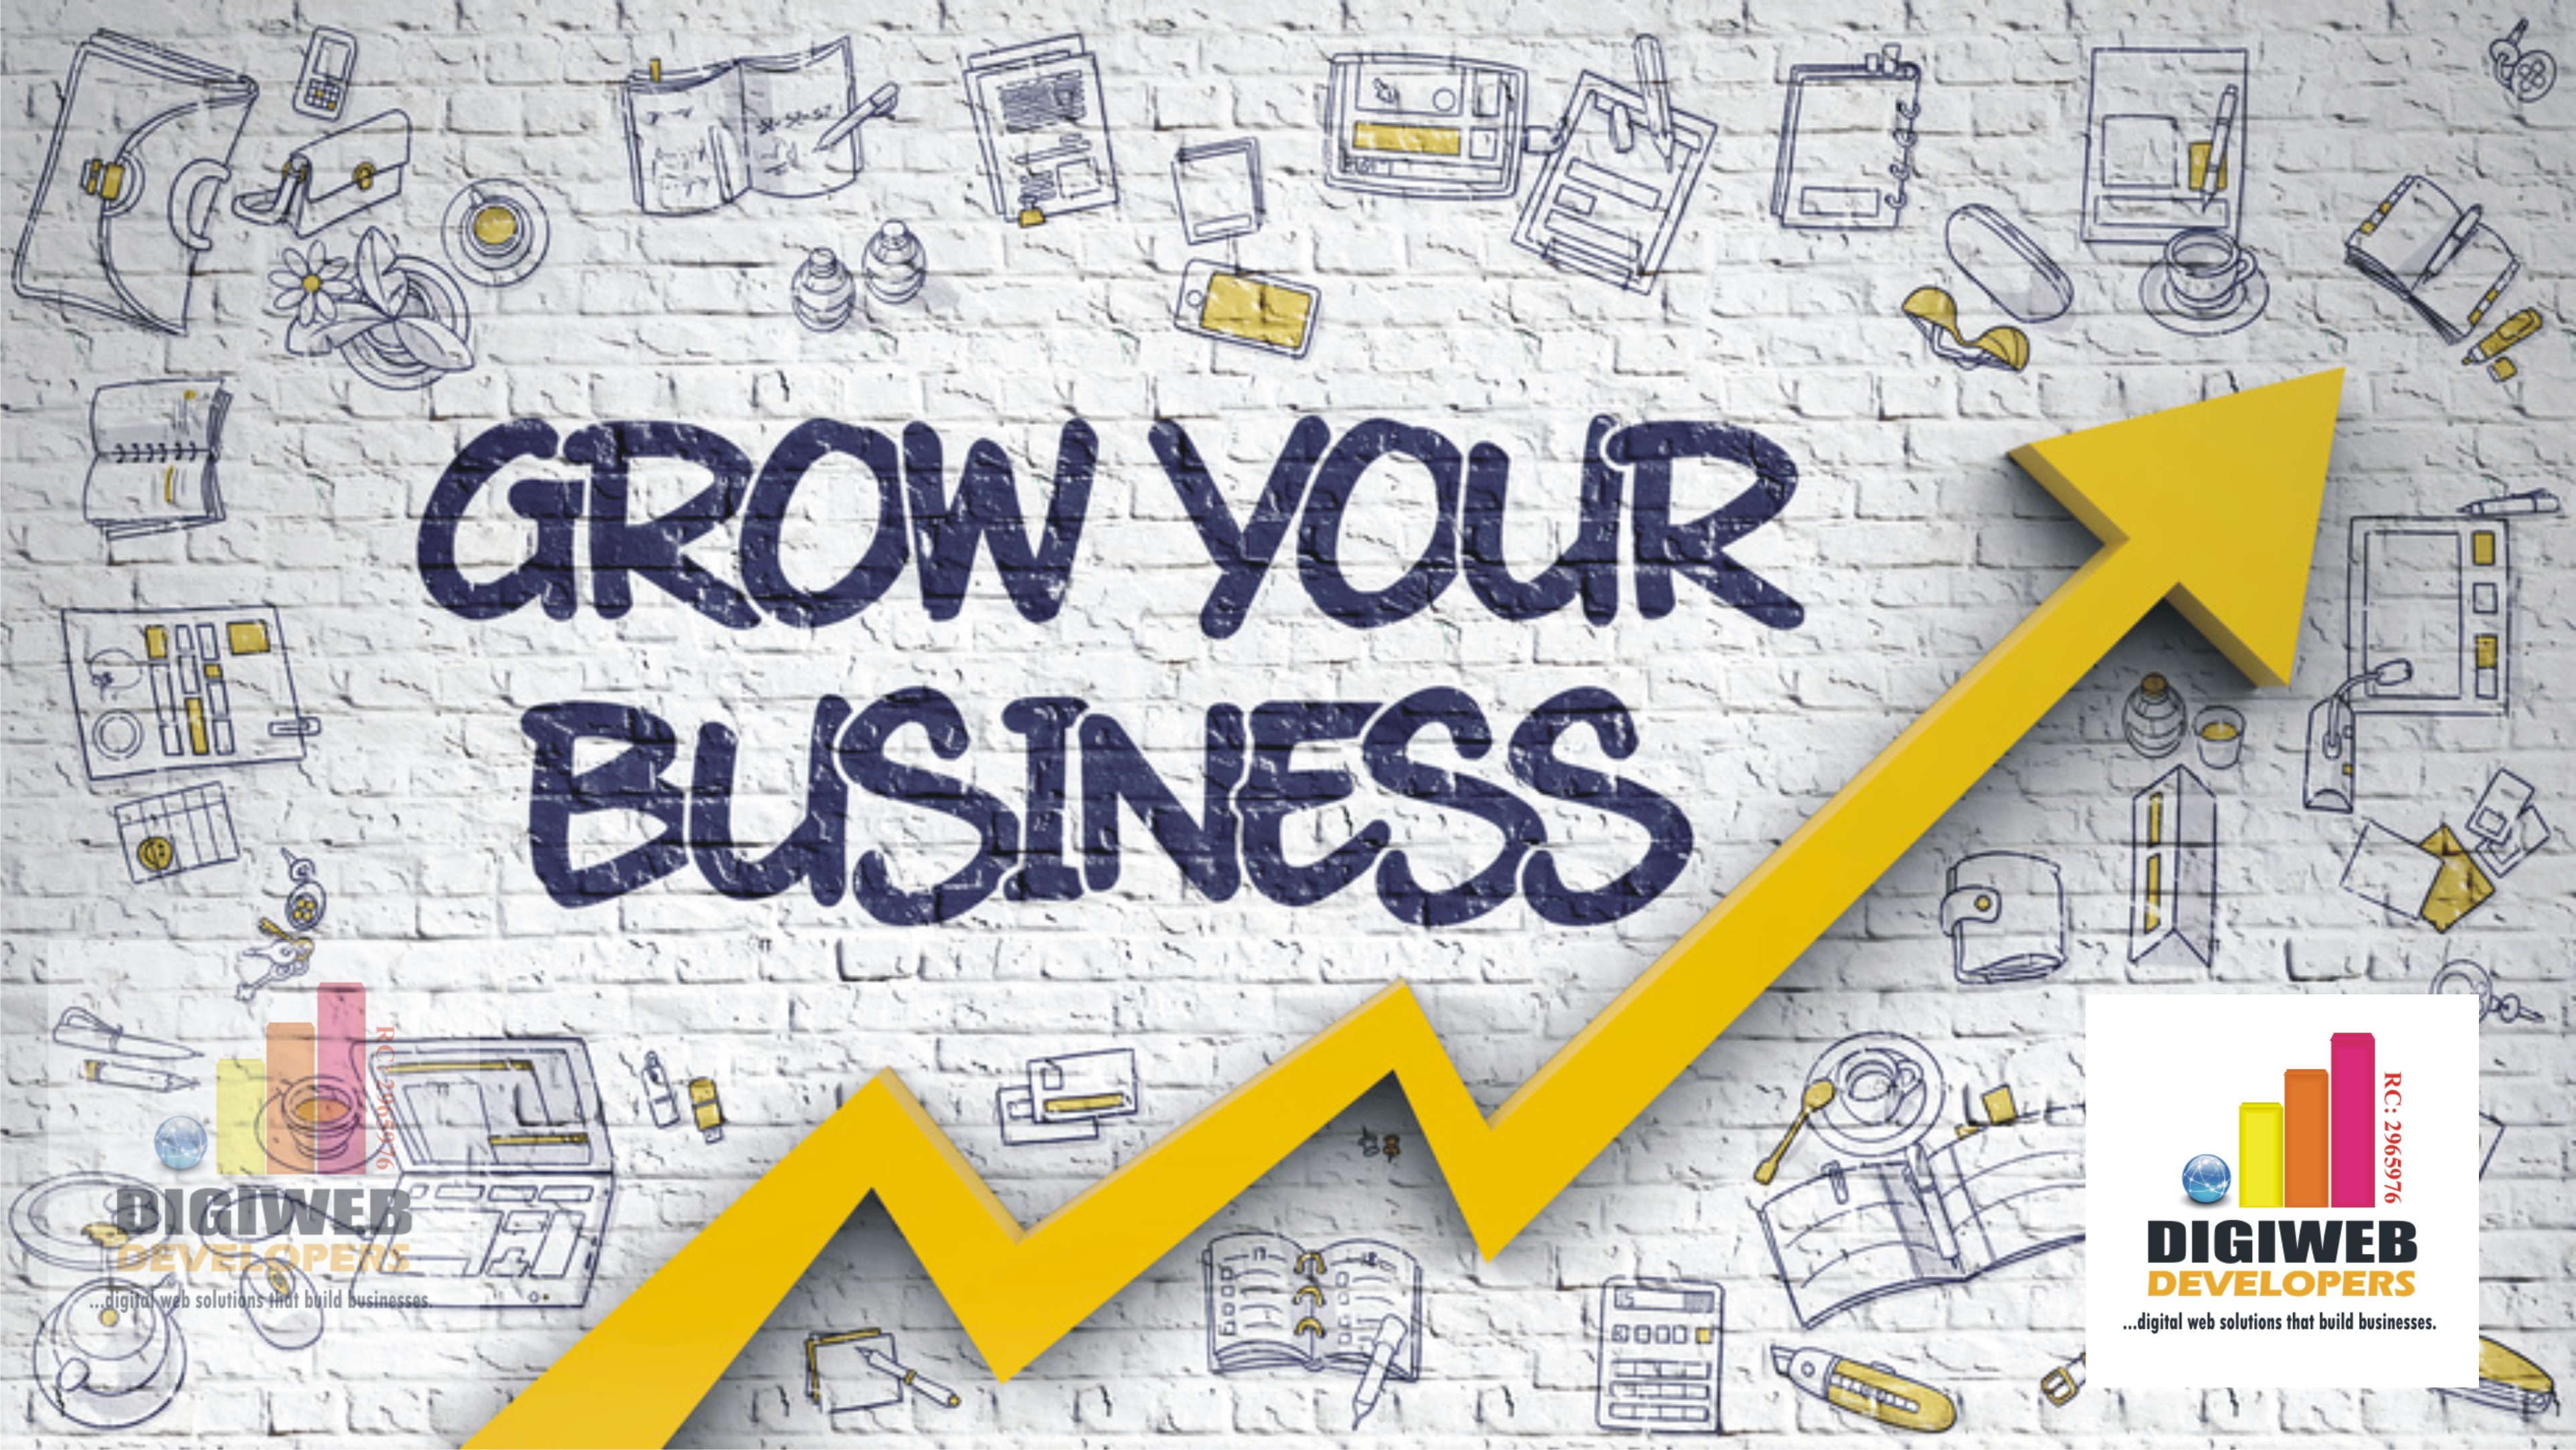  Your Business Growth - Start Utilising Digital Technologies Today